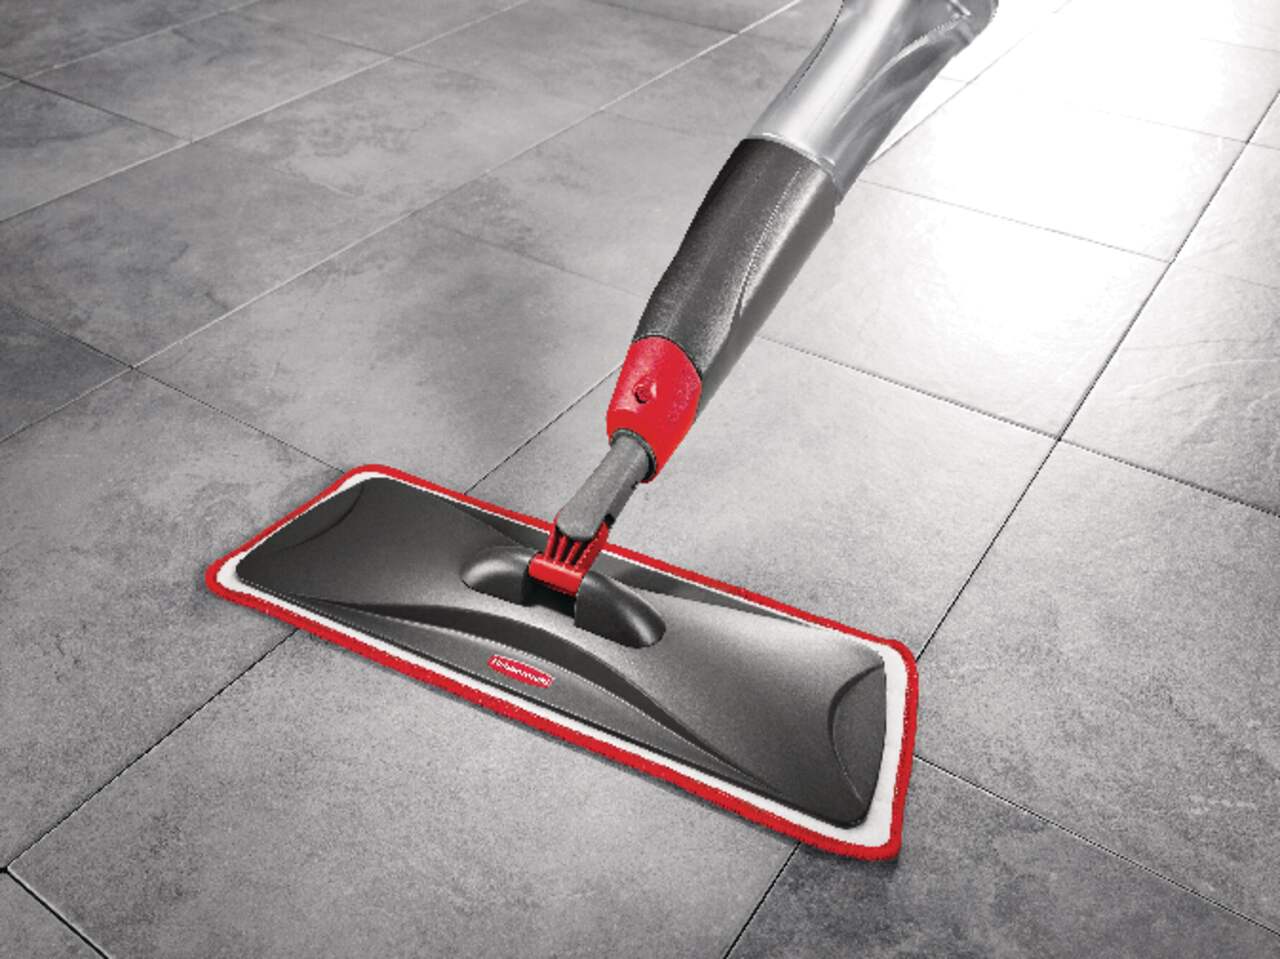 Rubbermaid Reveal Spray Mop Floor Cleaning Kit with Wet Pads and